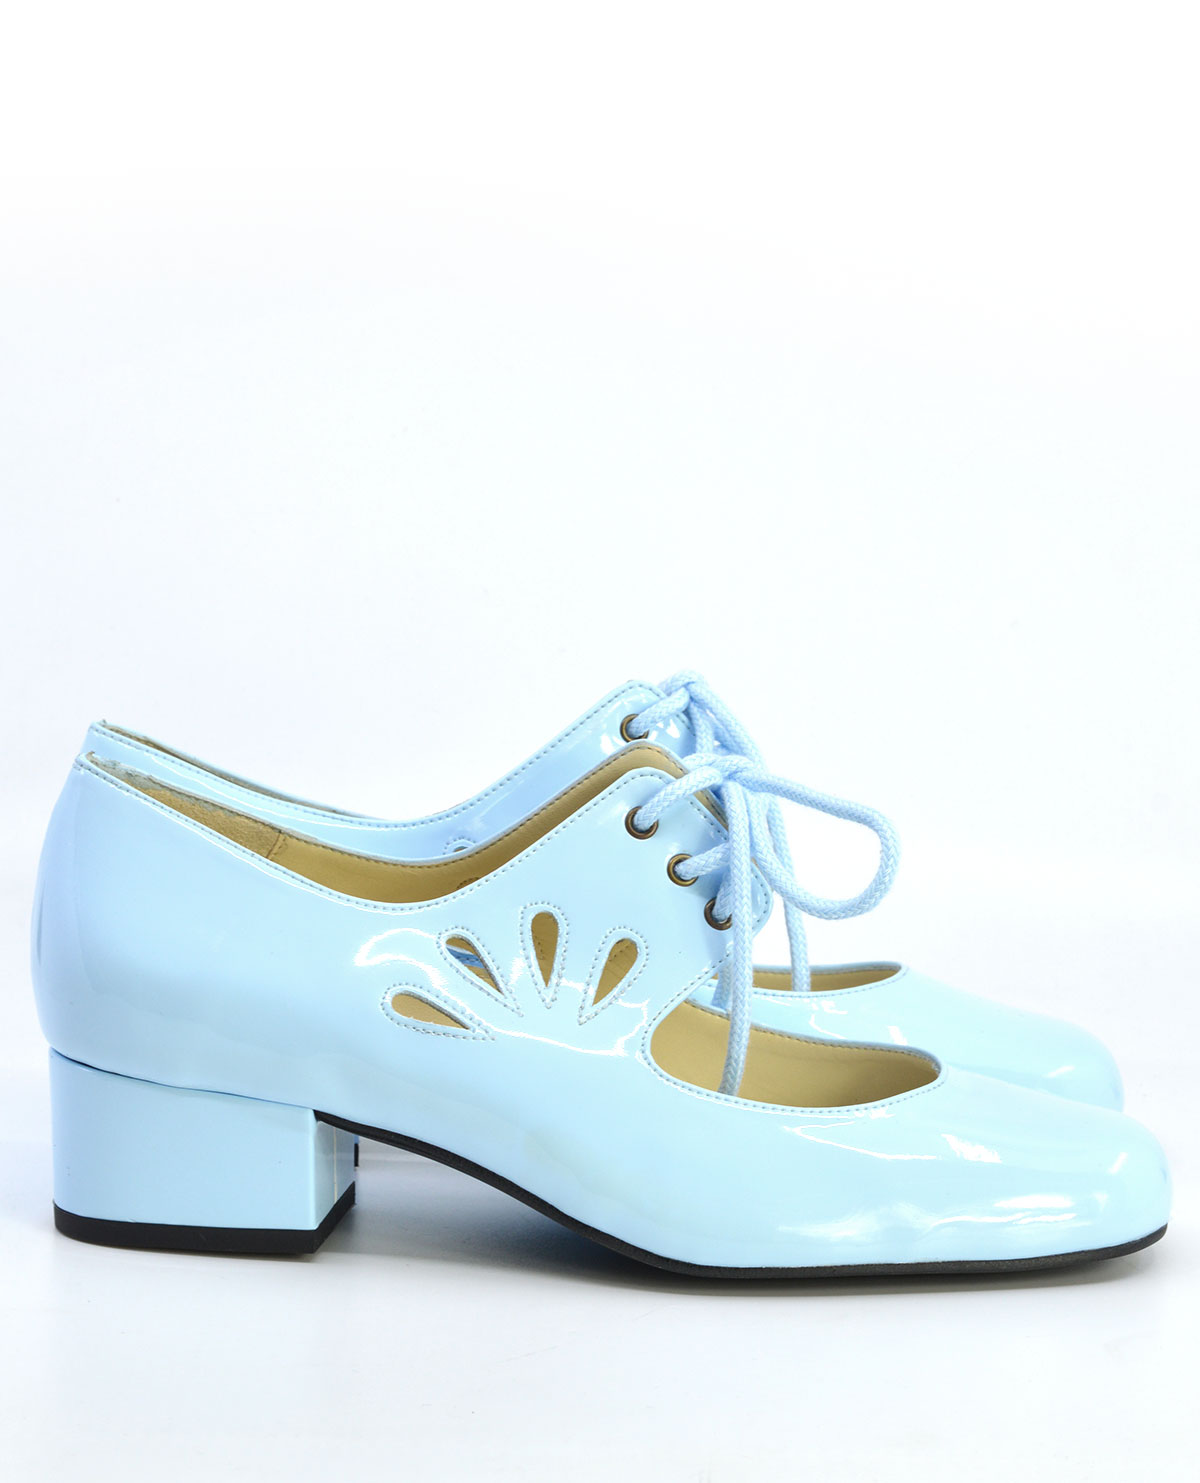 The Vegan Marianne In Baby Blue – Ladies Retro Shoes by Mod Shoes – Mod  Shoes